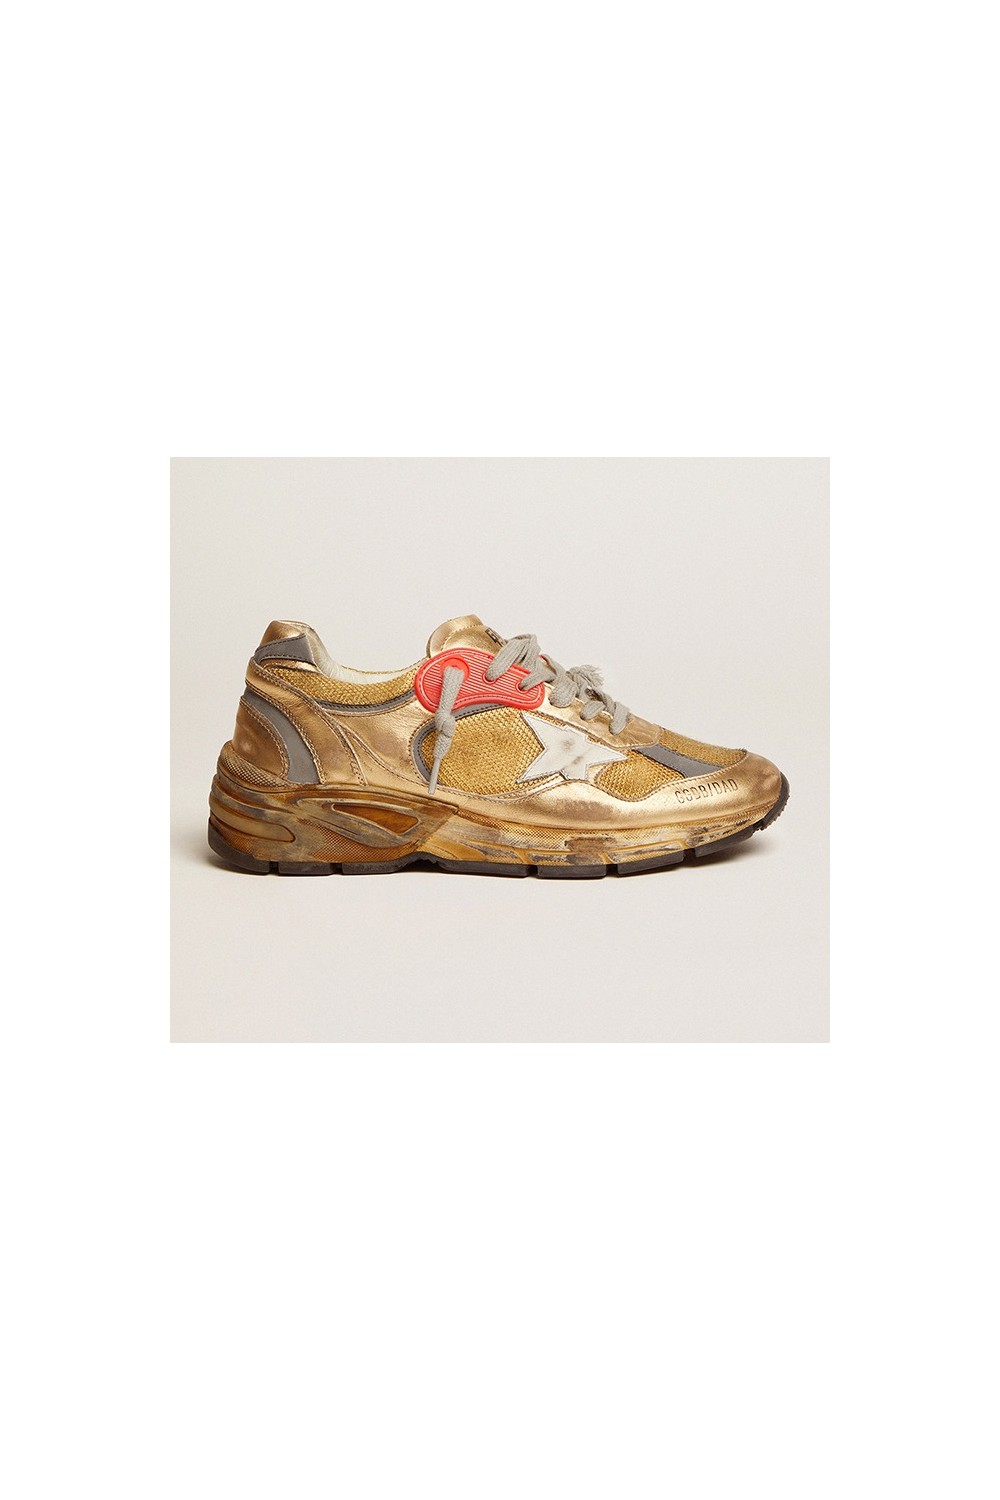 GOLDEN GOOSE RUNNING DAD NET and LAMINATED UPPER Leather STAR col. Gold ...